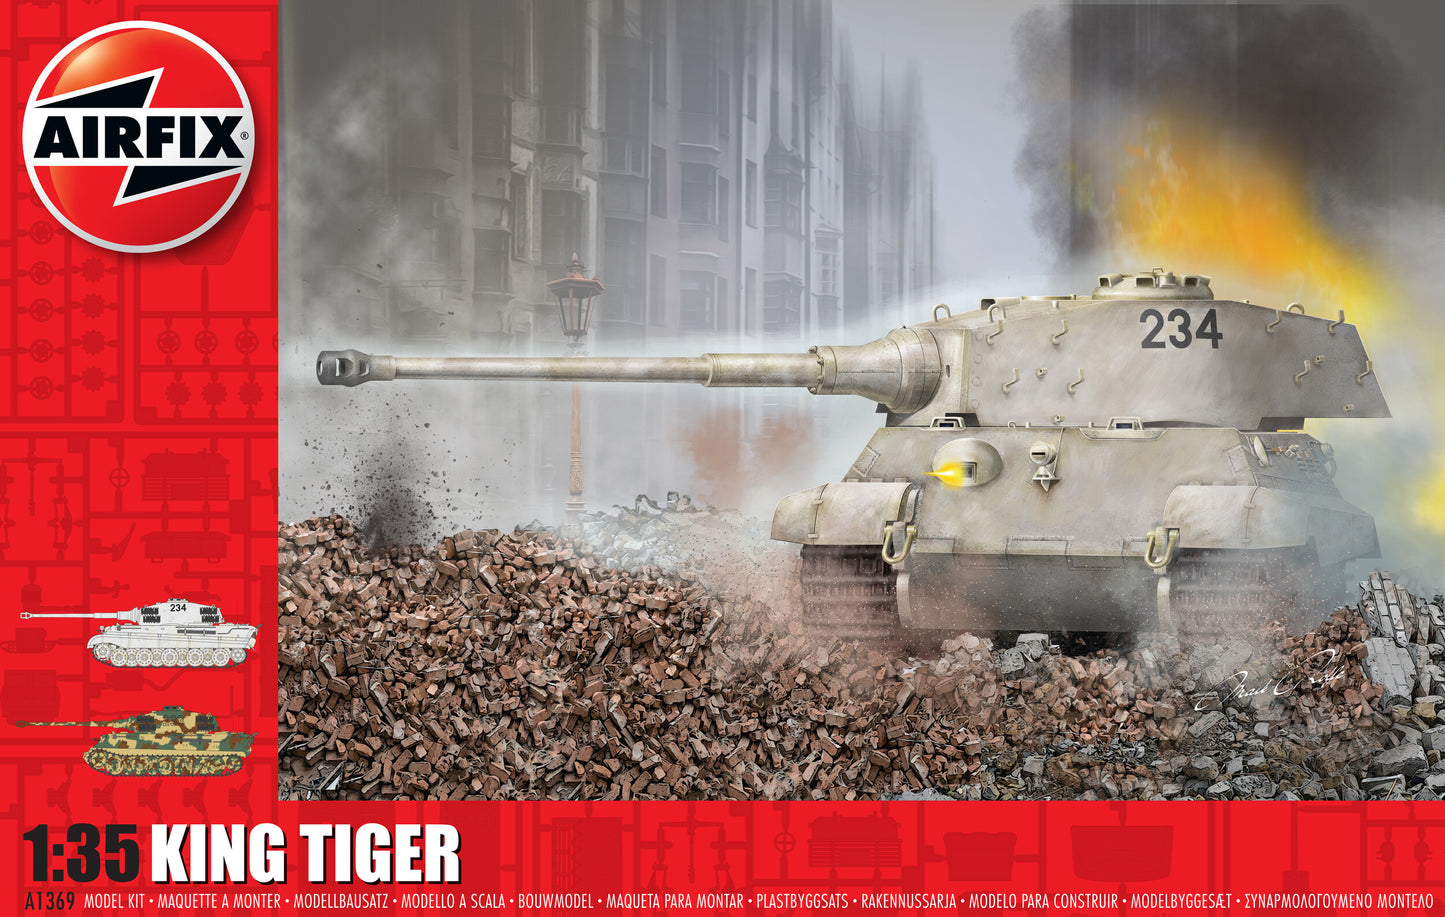 Airfix 1/35th scale King Tiger